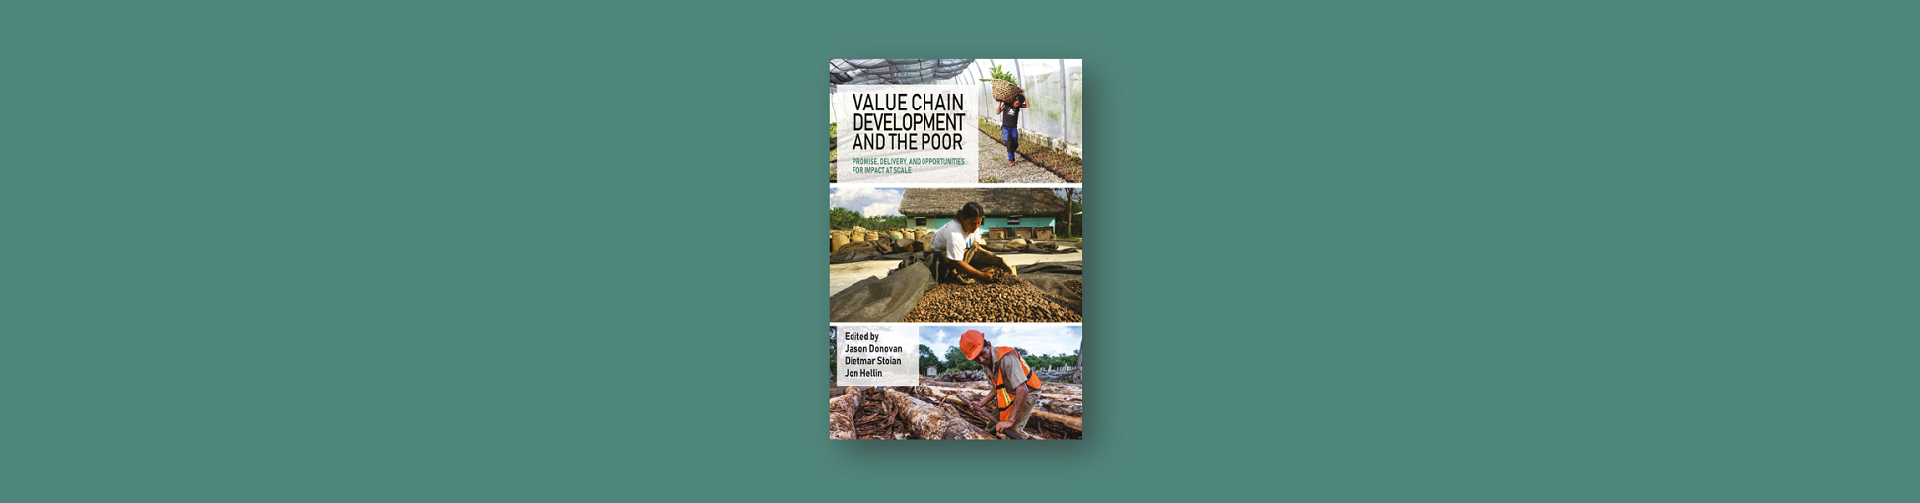 Value chain development and the poor: Promise, delivery, and opportunities for impact at scale